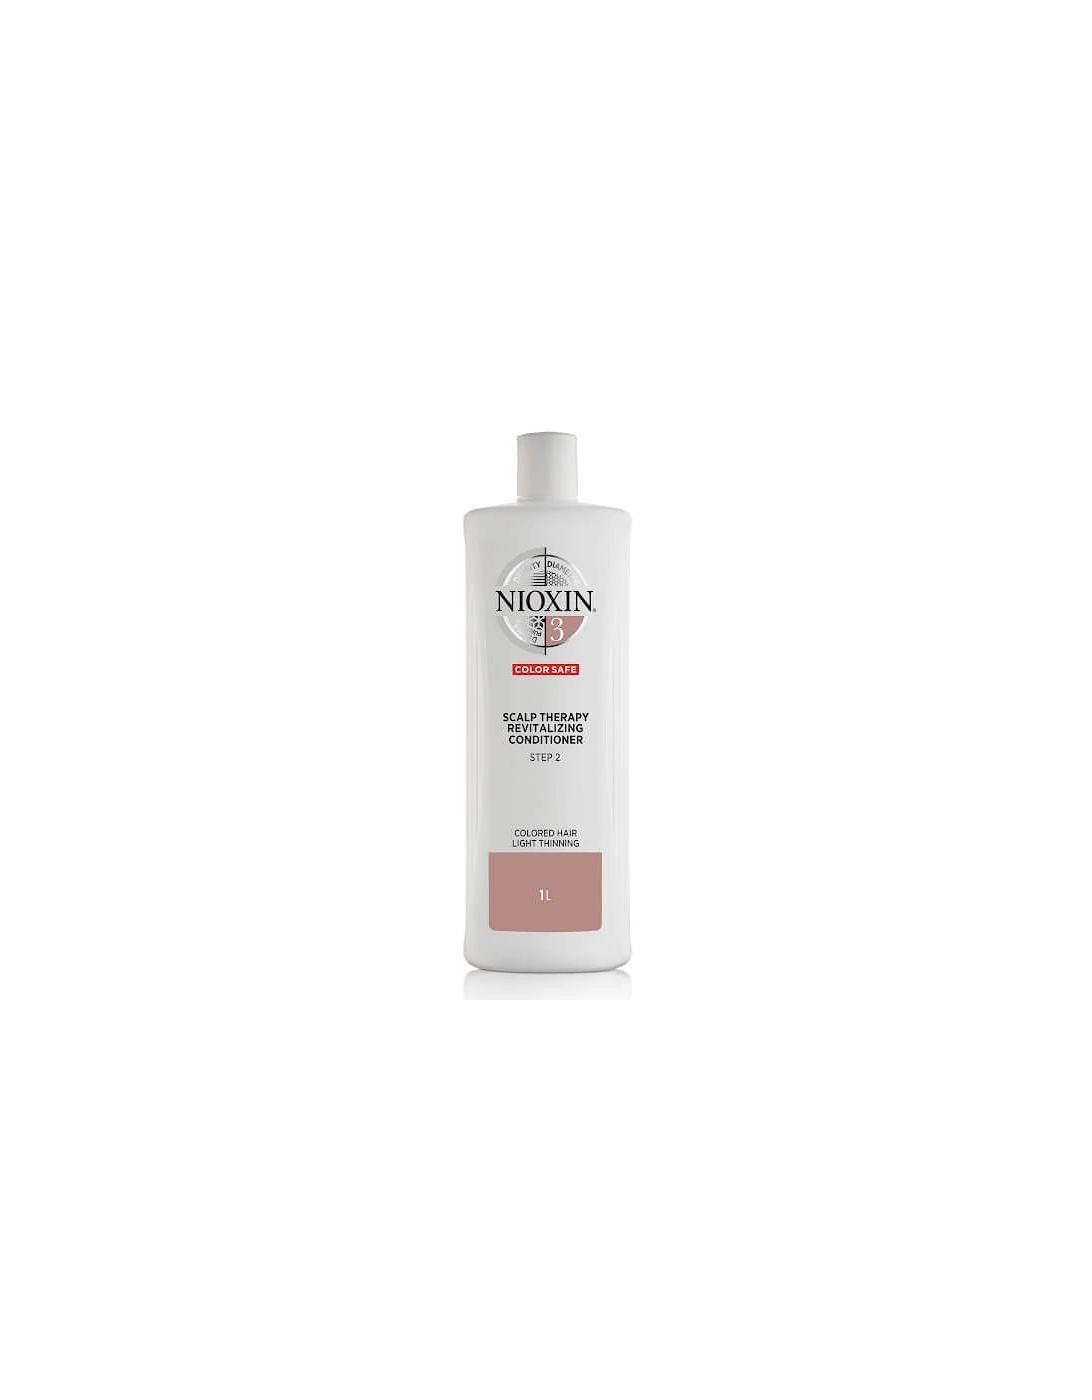 3-Part System 3 Scalp Therapy Revitalising Conditioner for Coloured Hair with Light Thinning 1000ml - NIOXIN, 2 of 1